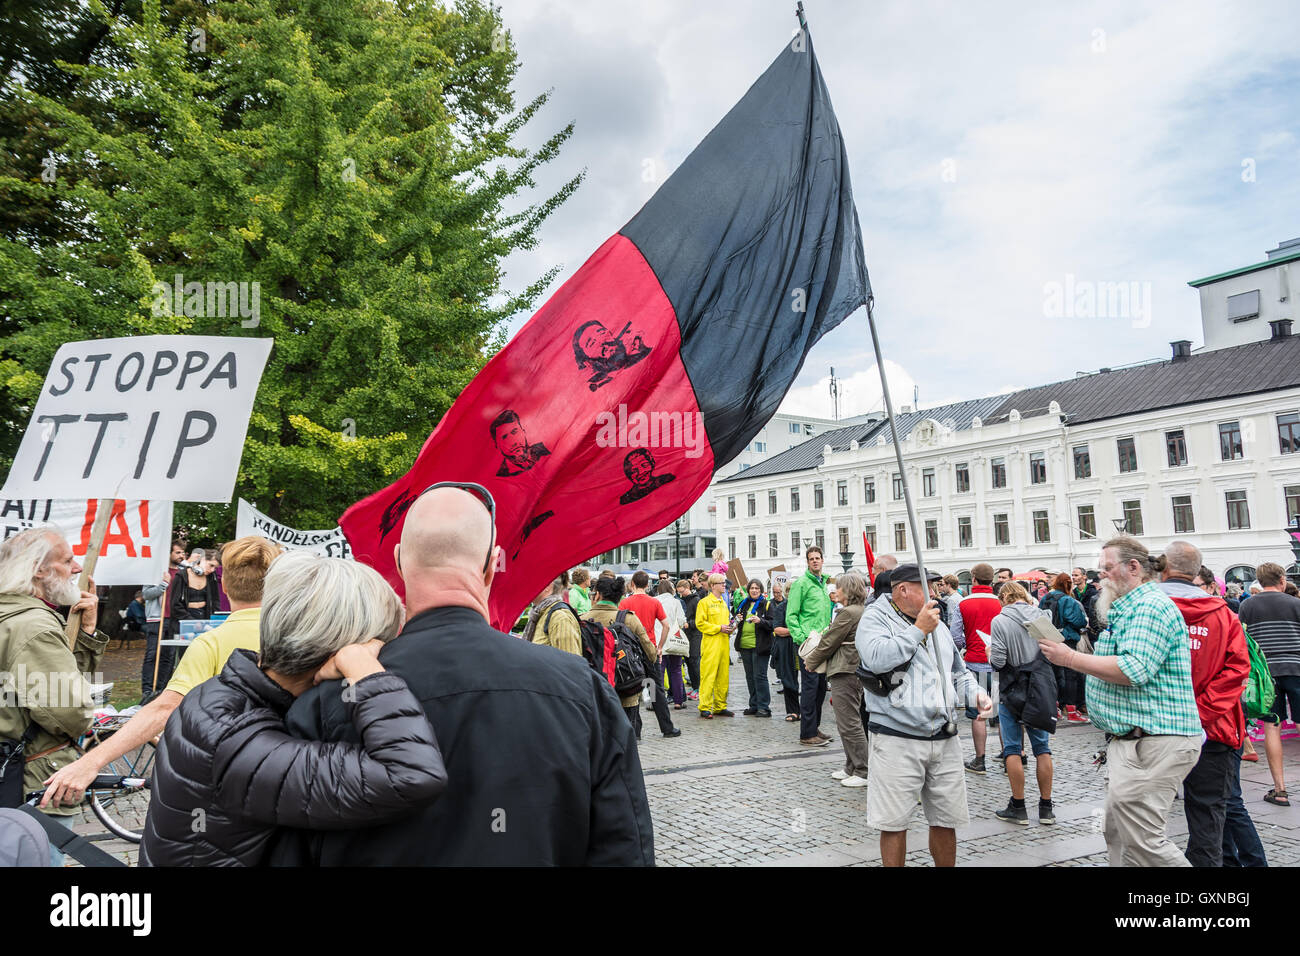 Malmö, Sweden, 17th September, 2016. Demonstrations over the world against the proposed free trade aggrements TTIP and CETA. Tommy Lindholm/Alamy Live News Stock Photo